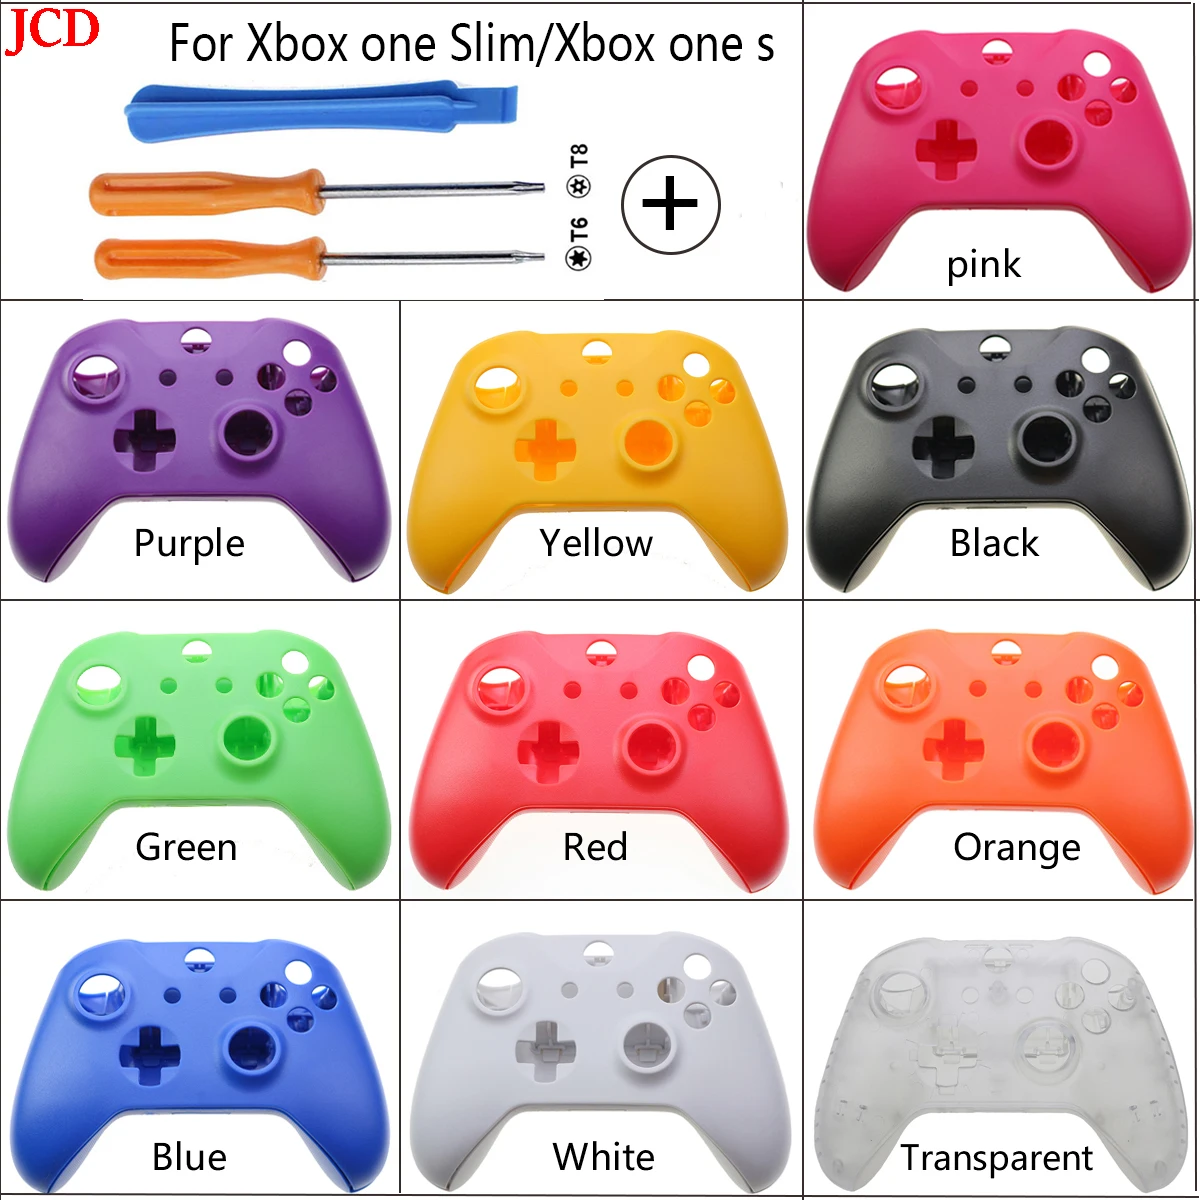 

JCD 1 Pcs For Xbox One S for XboxOne Slim Replacement Top Faceplate Case Front Shell Handle Grip Housing Cover Controller & Tool